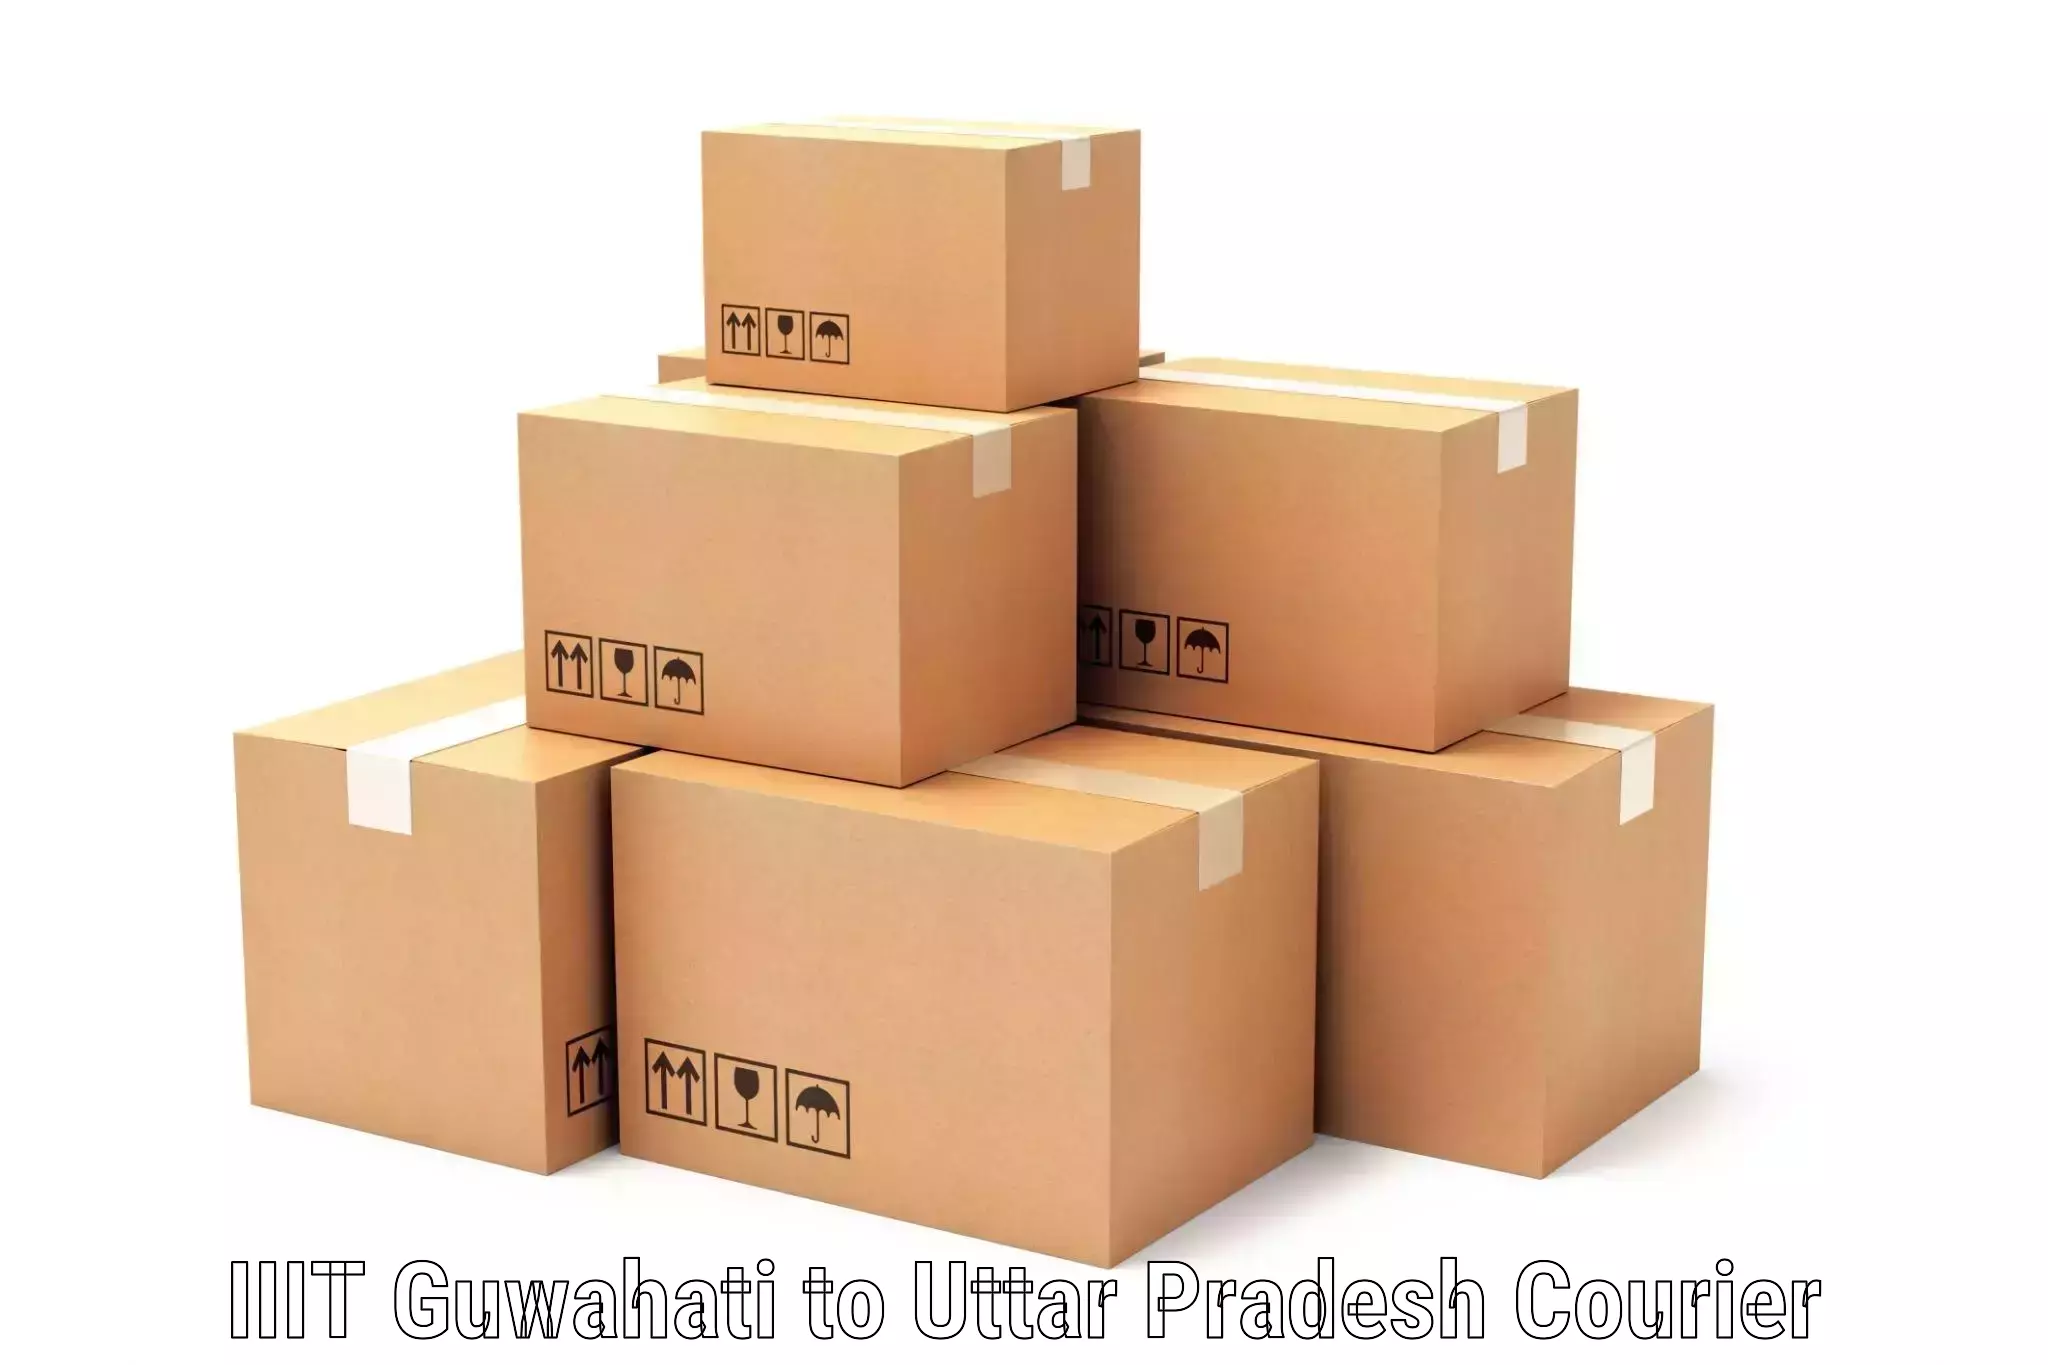 Commercial shipping rates IIIT Guwahati to Agra